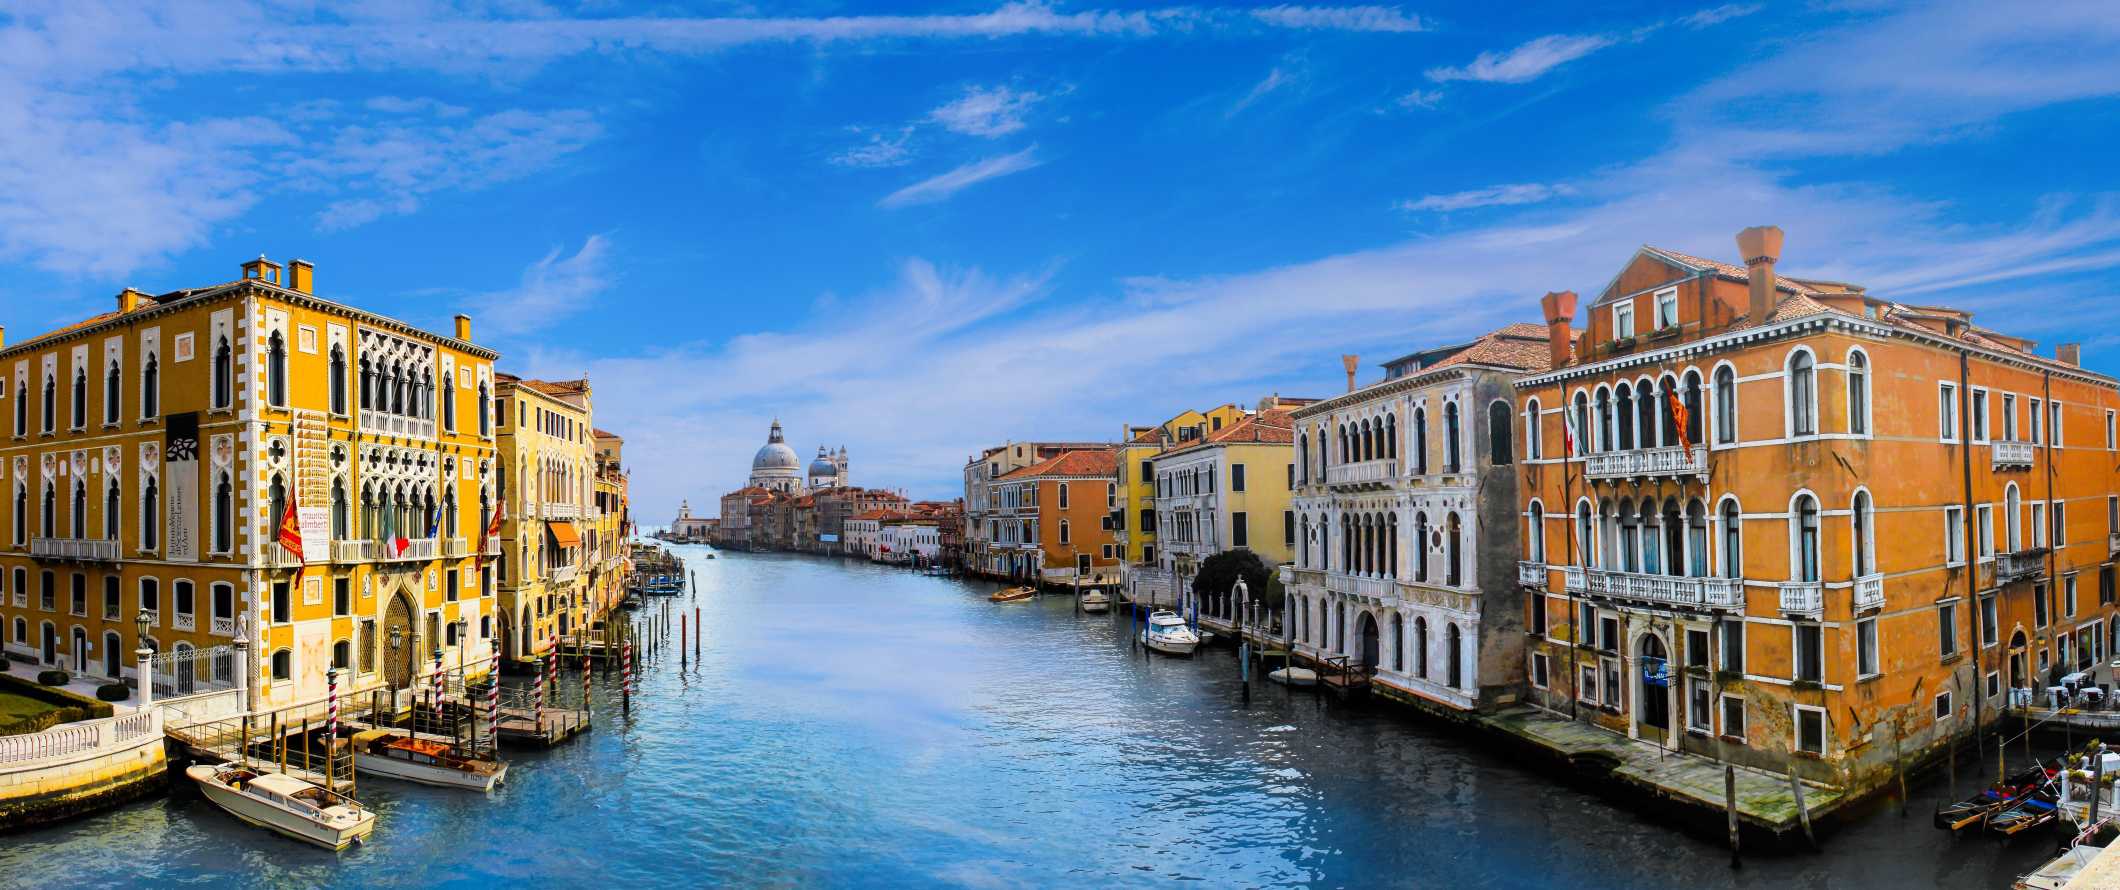 Panoramic views showing the charming, historic canals winding through Venice, Italy.